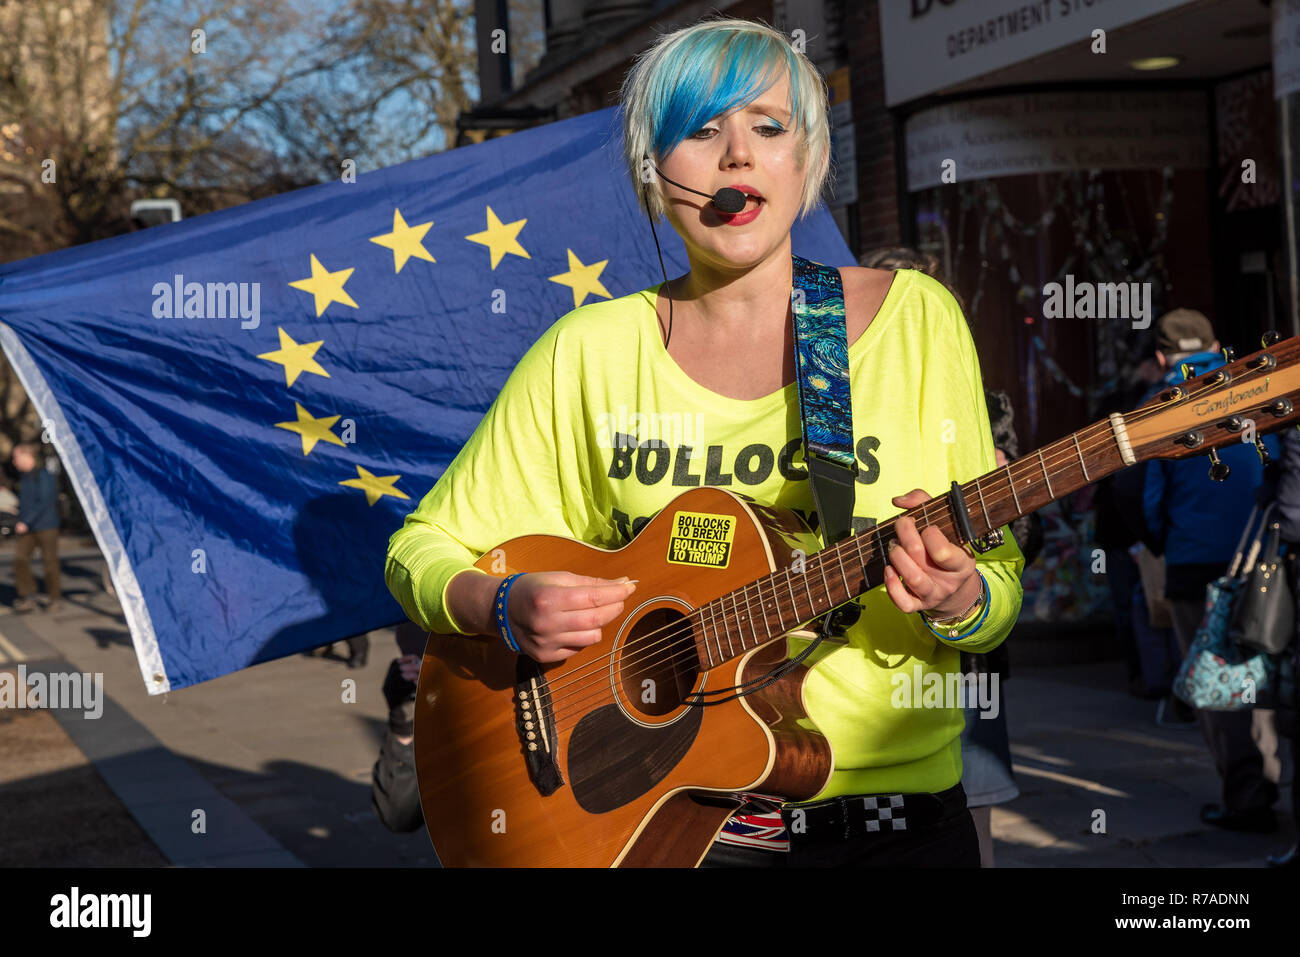 Oxford, UK. 8th December 2018. The Bollocks to Brexit Bus Tour visit to Oxford was greeted by Peoples Vote and Remain anti Brexit campaigners. The aim of the Bollocks to Brexit  campaign was to motivate people to write letters to their MPs demanding a final say, and to become more active in the campaign to stop Brexit. Campaigners marched from Oxford Railway Station to Cornmarket Street in the town centre, where a rally took place. Boris Johnson impersonator Drew Galdon, FauxBoJo, and Madeleina Kay, EU Supergirl, entertained and put over the campaigns message. Credit: Stephen Bell/Alamy Live N Stock Photo